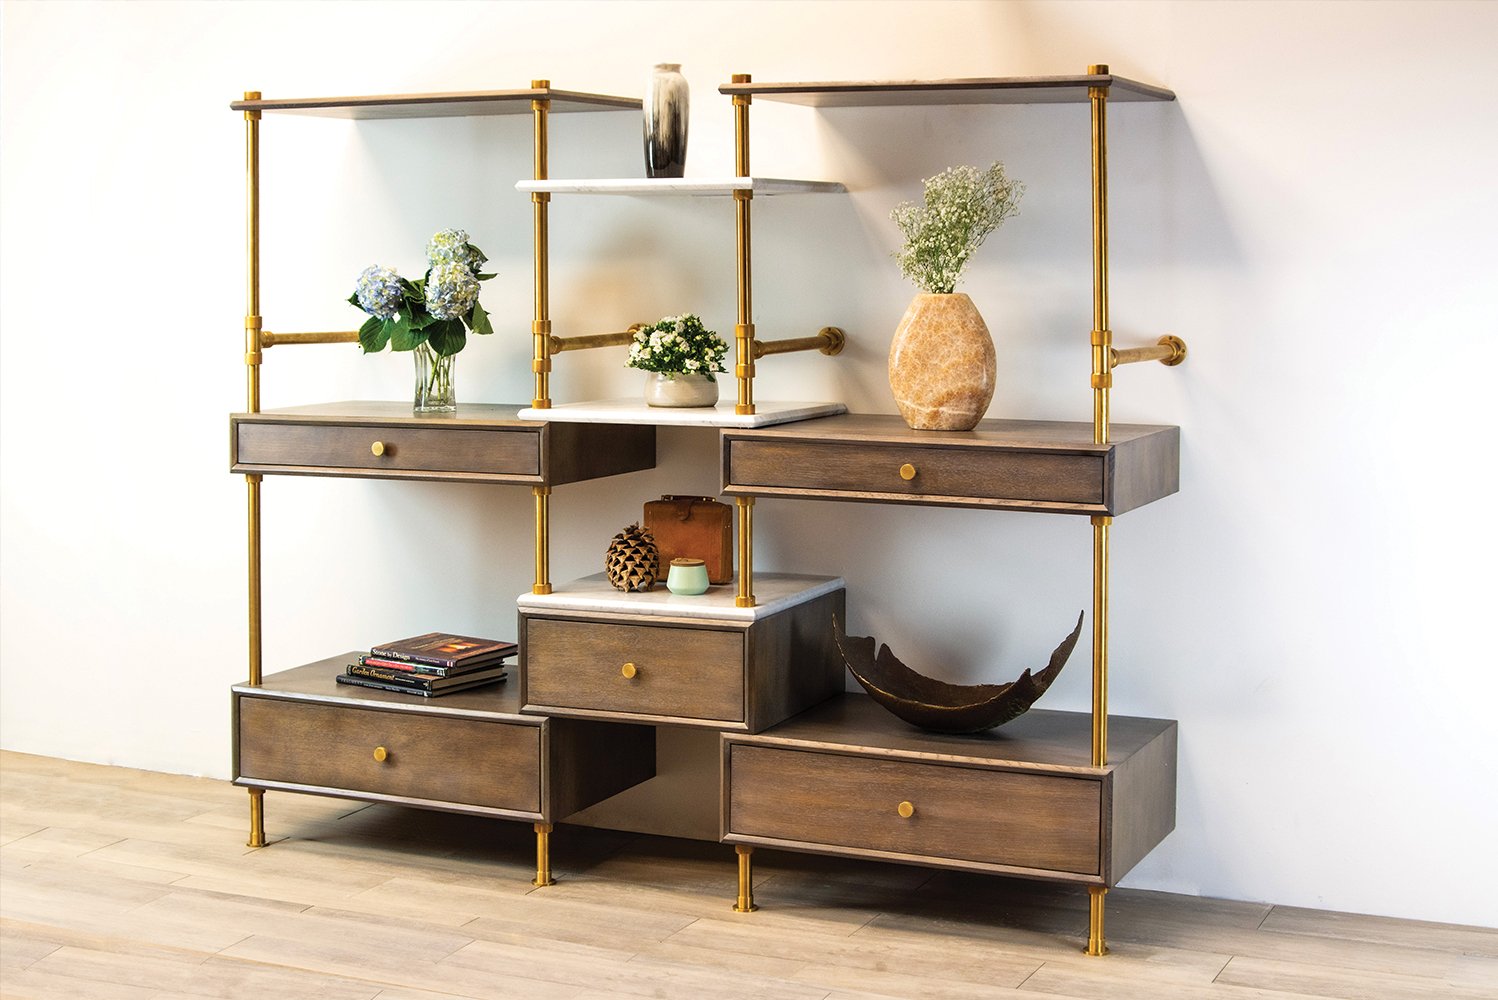 Stone Forest introduced its first furniture piece the Elemental storage wall etagere 